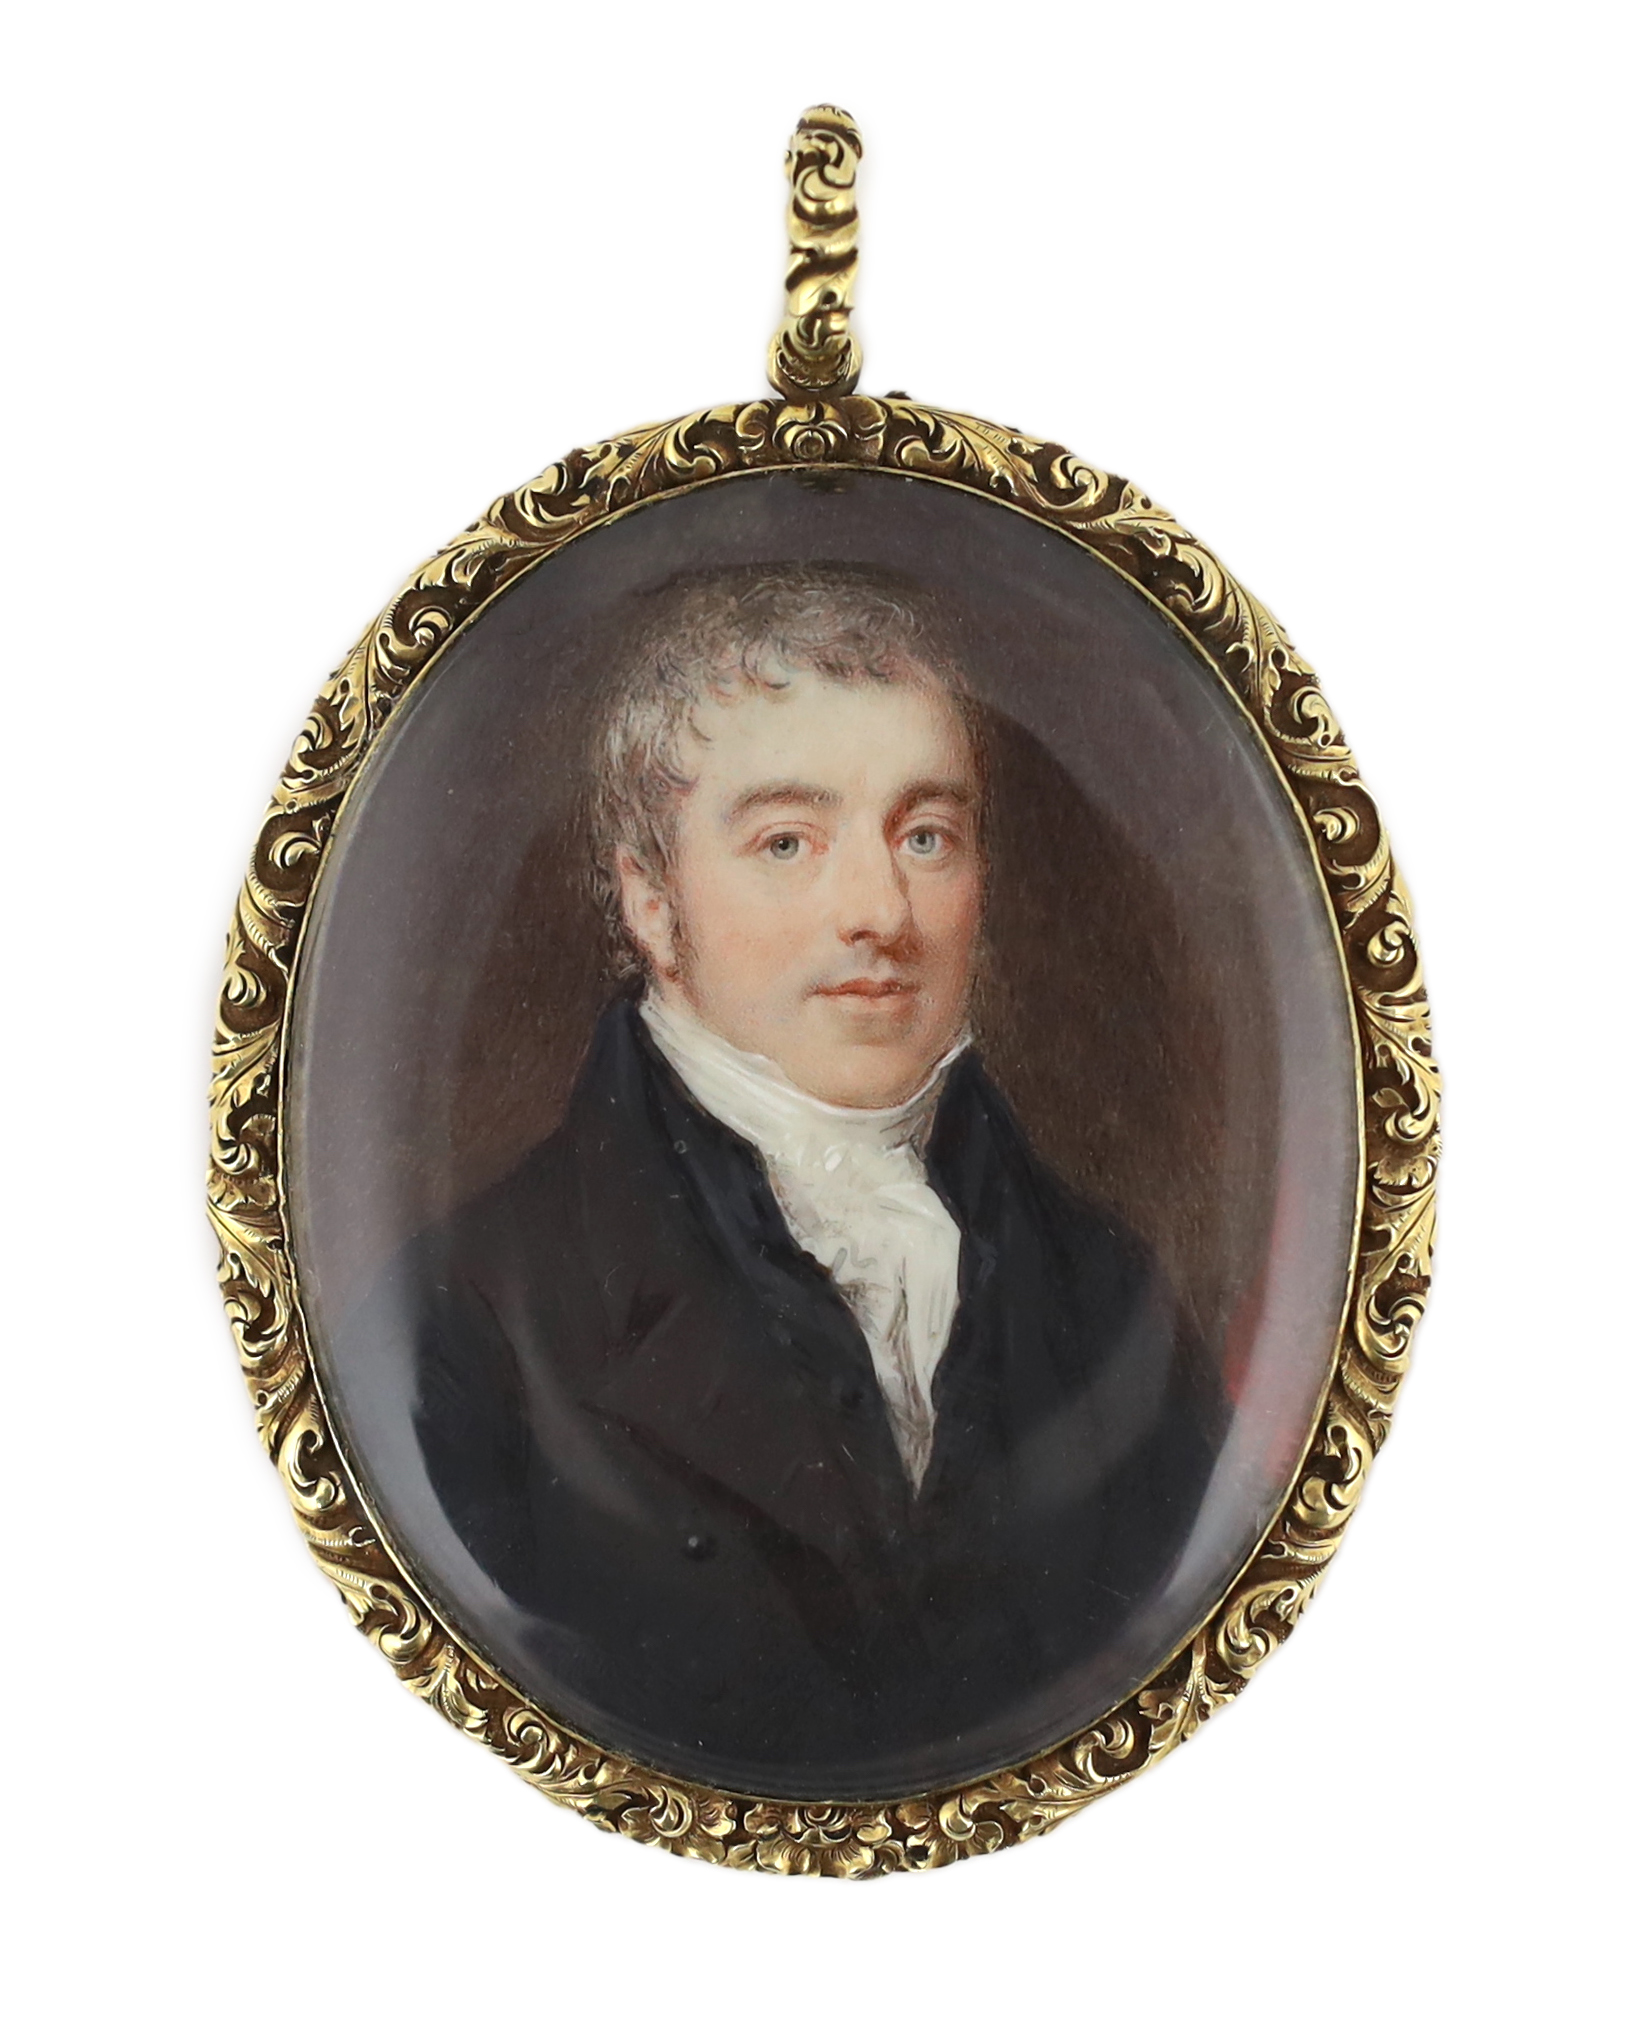 George Patten ARA (British, 1801-1865), Portrait miniature of a gentleman, watercolour on ivory, 6.2 x 5cm. CITES Submission reference C24YRMZT